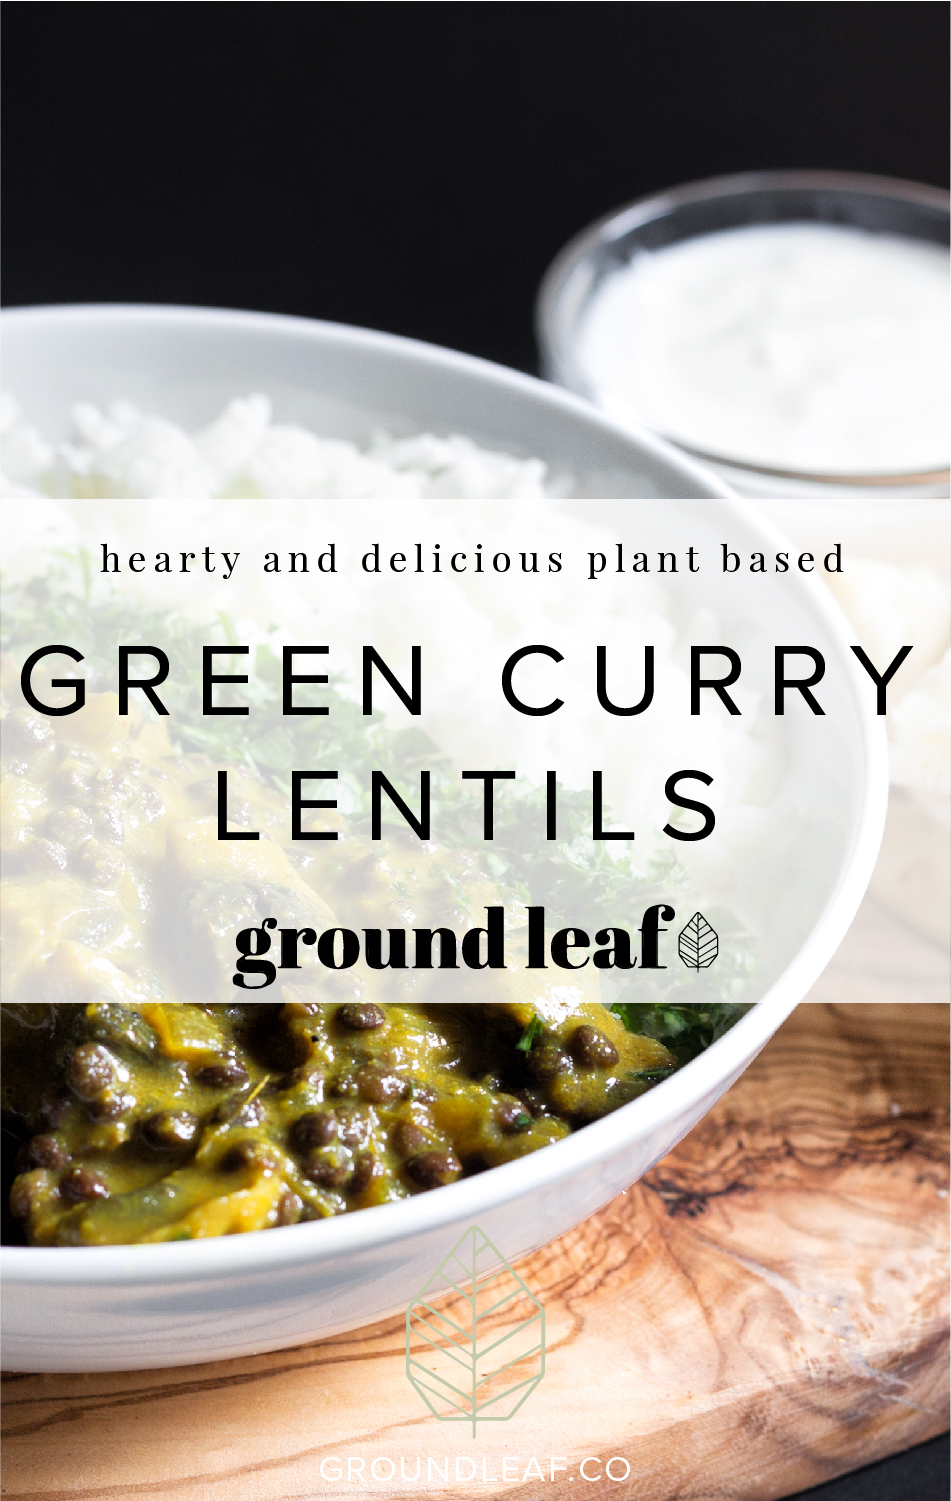 Learn how to make hearty and delicious green curry lentils in the instant pot.